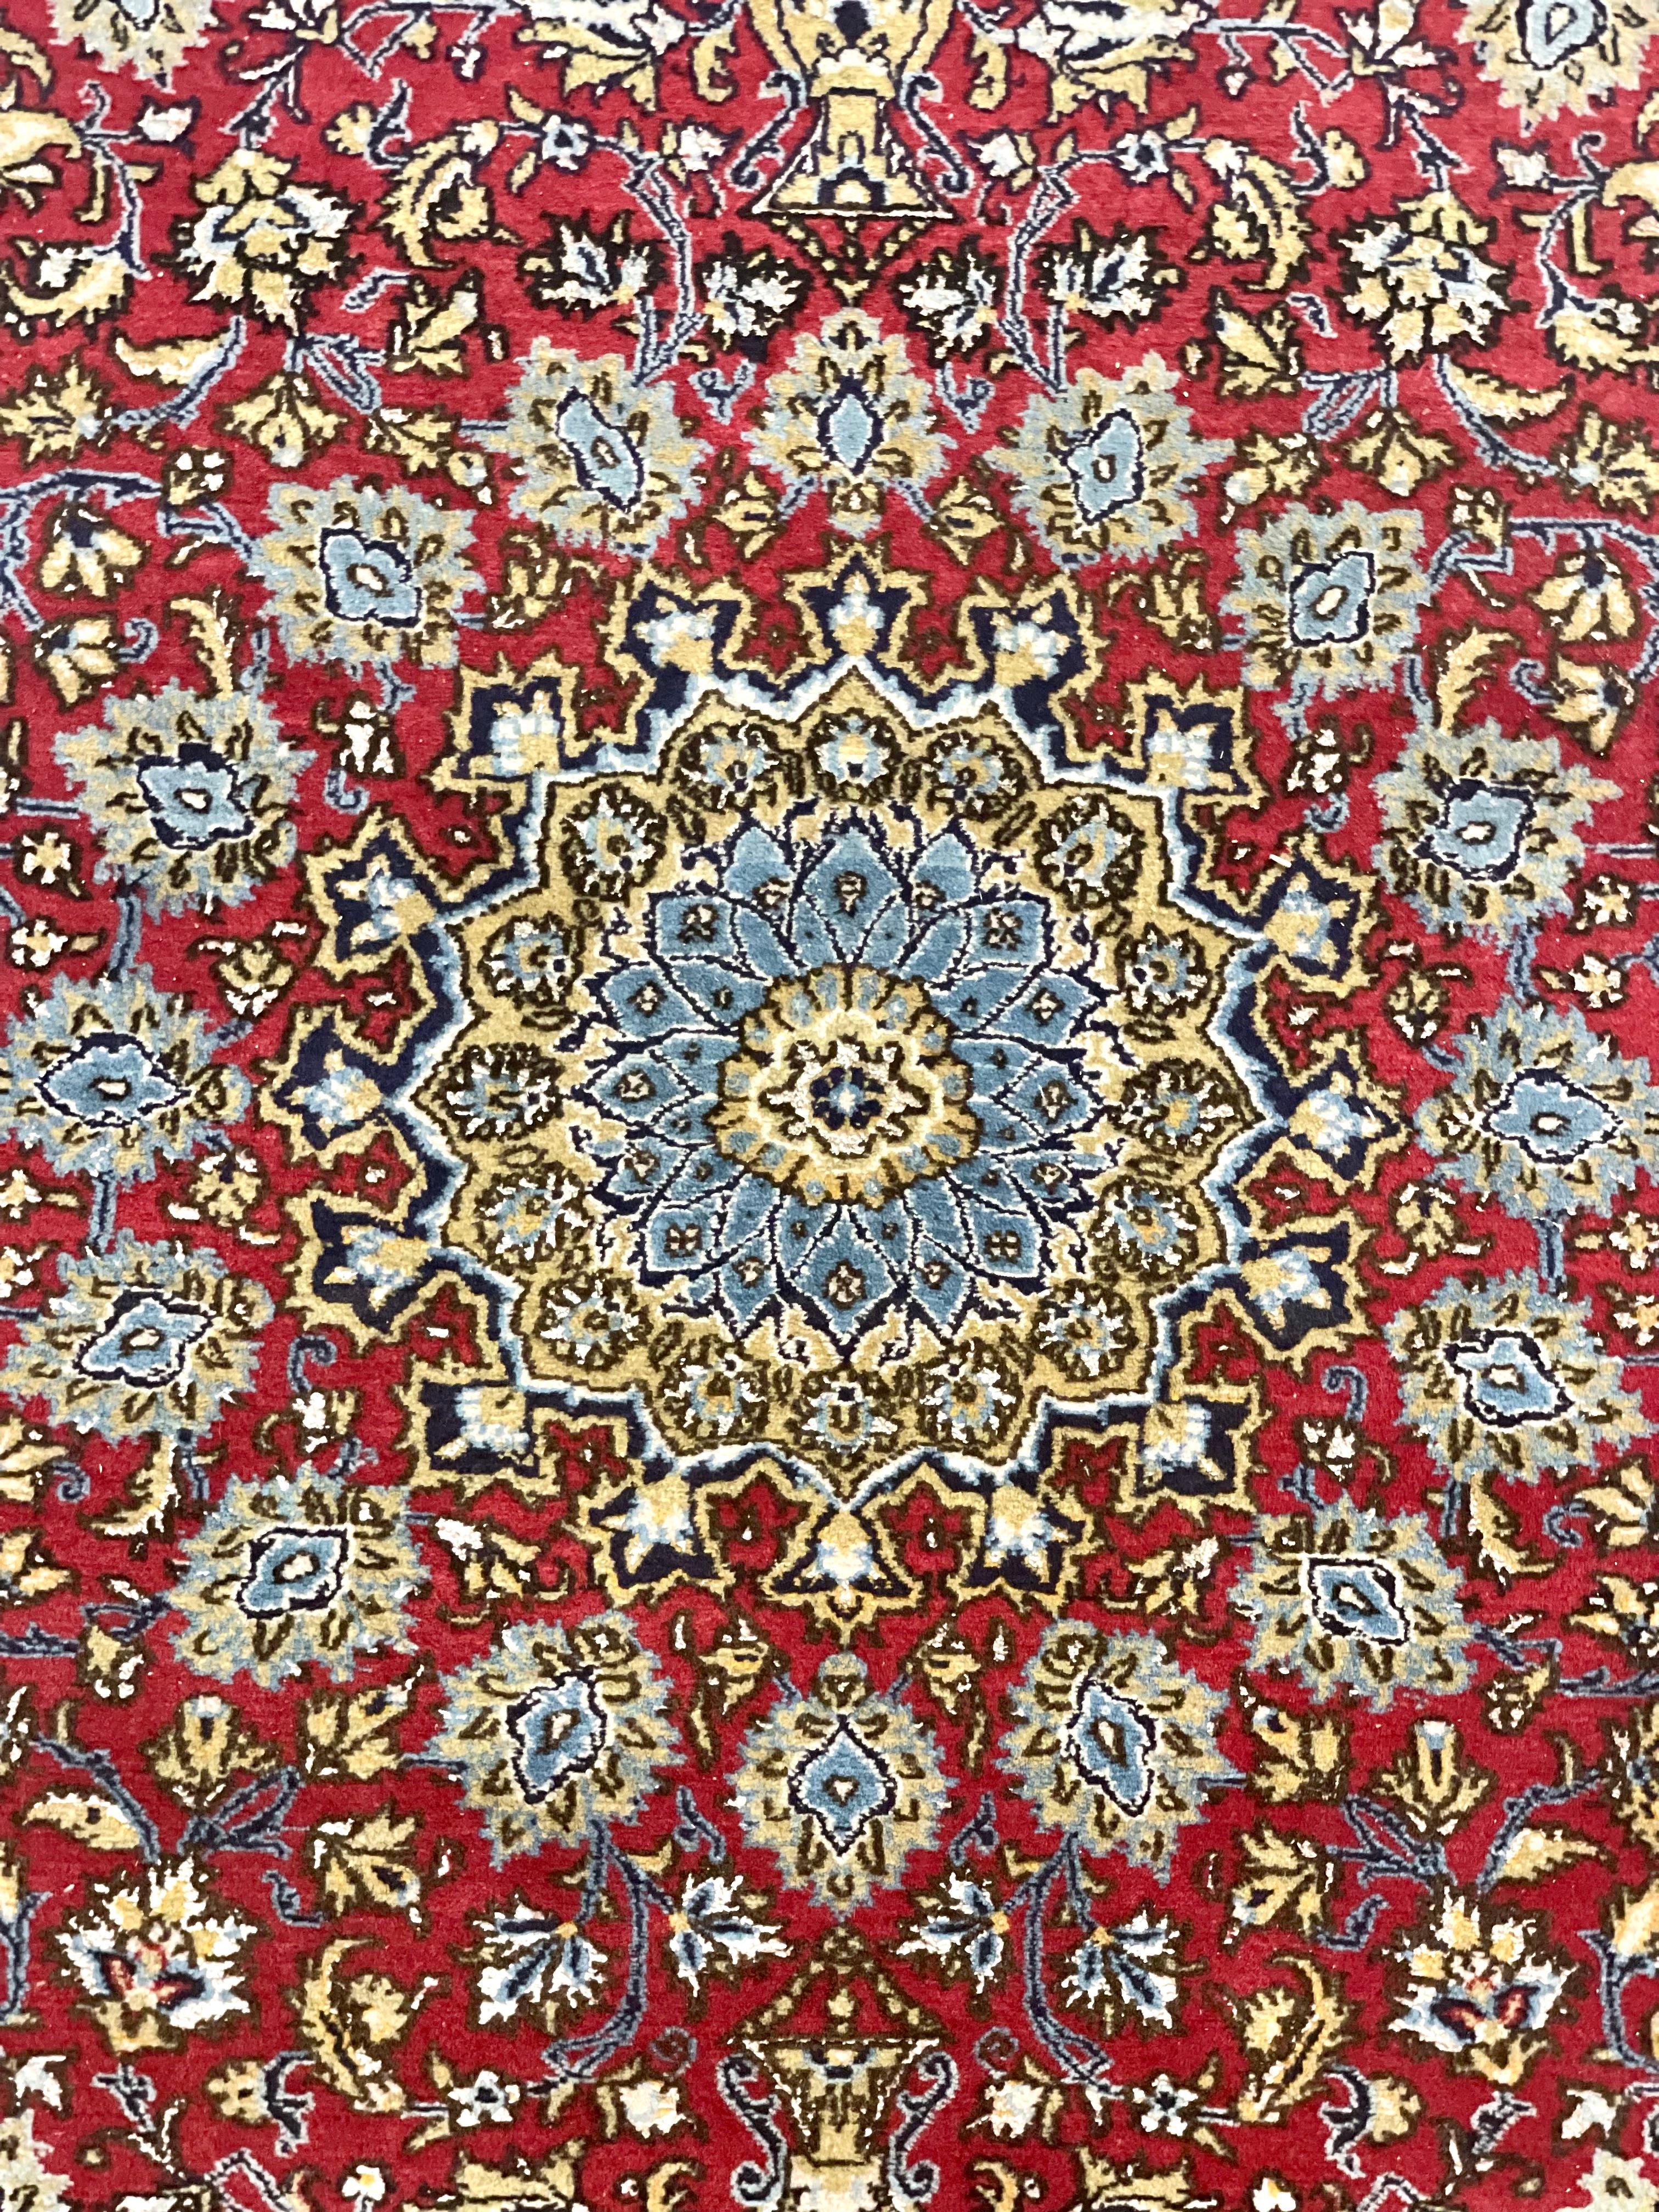 A Persian 'Qum' or 'Ghoum' rug hand-woven in wool and silk, featuring a central star- shaped medallion in vivid hues of red and blue, from which rosettes and flowers radiate outwards towards a sandy-coloured border. Prized for the complexity and